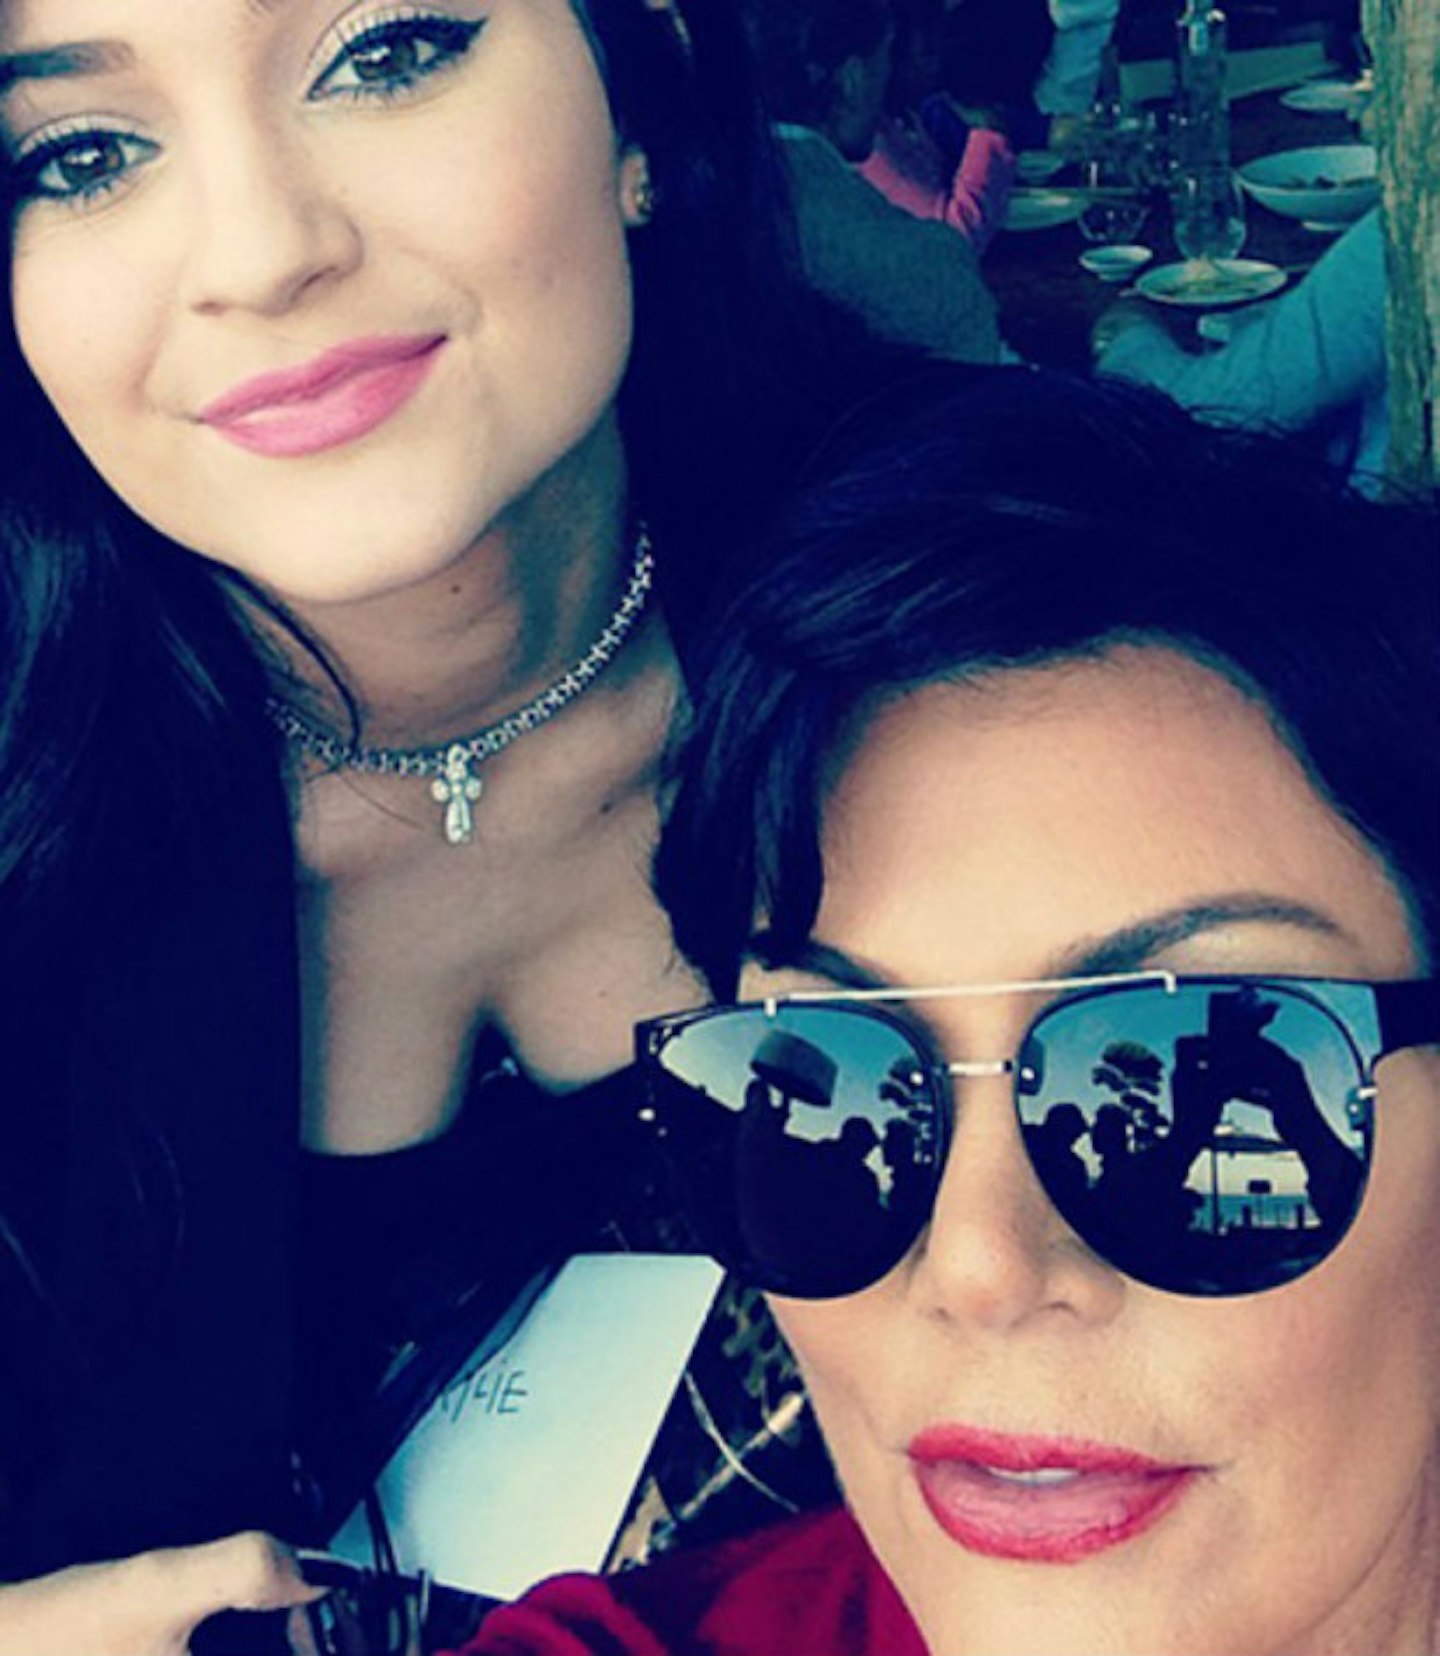 Kylie Jenner 16 picture by Kris jenner